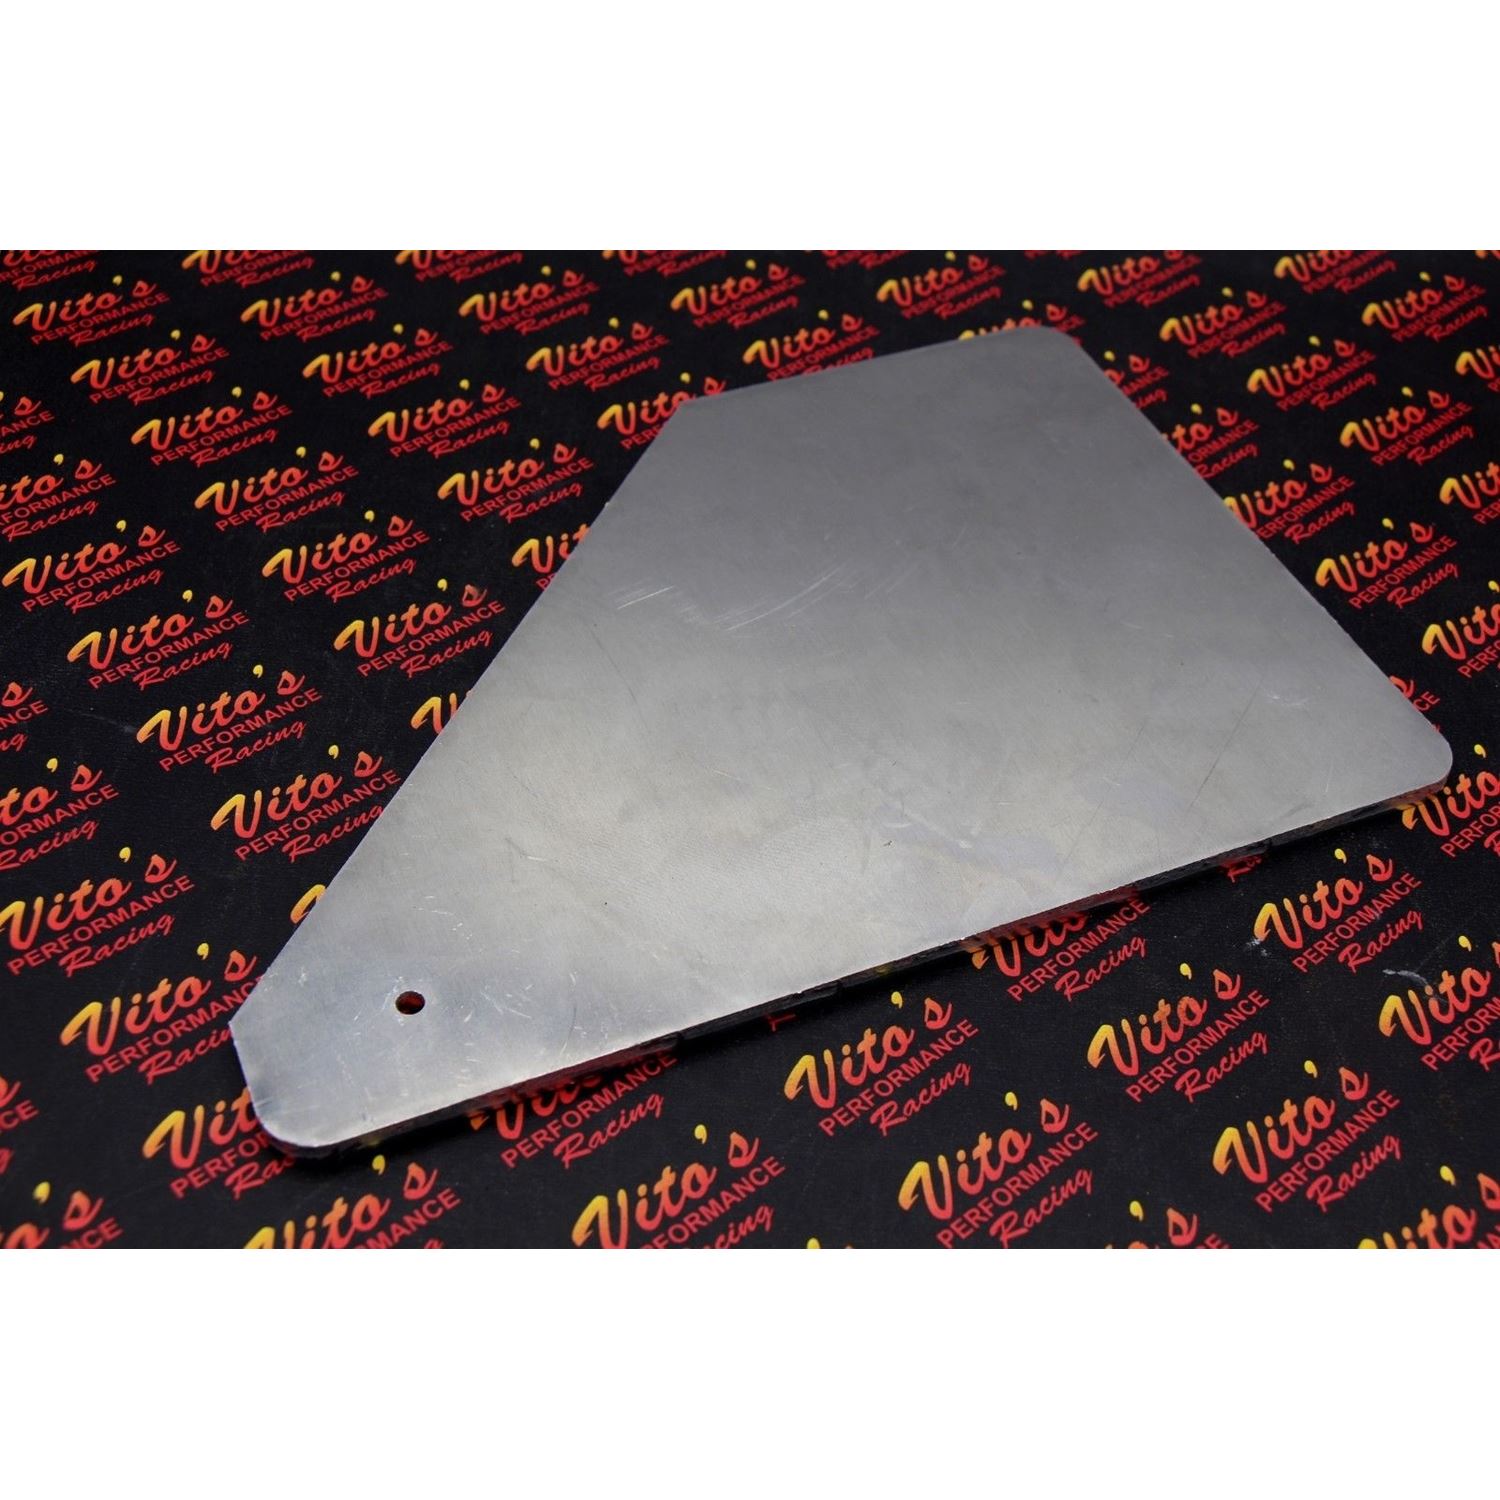 Paddle boat aluminum rudder SUN Dolphin - 3 or 5 s